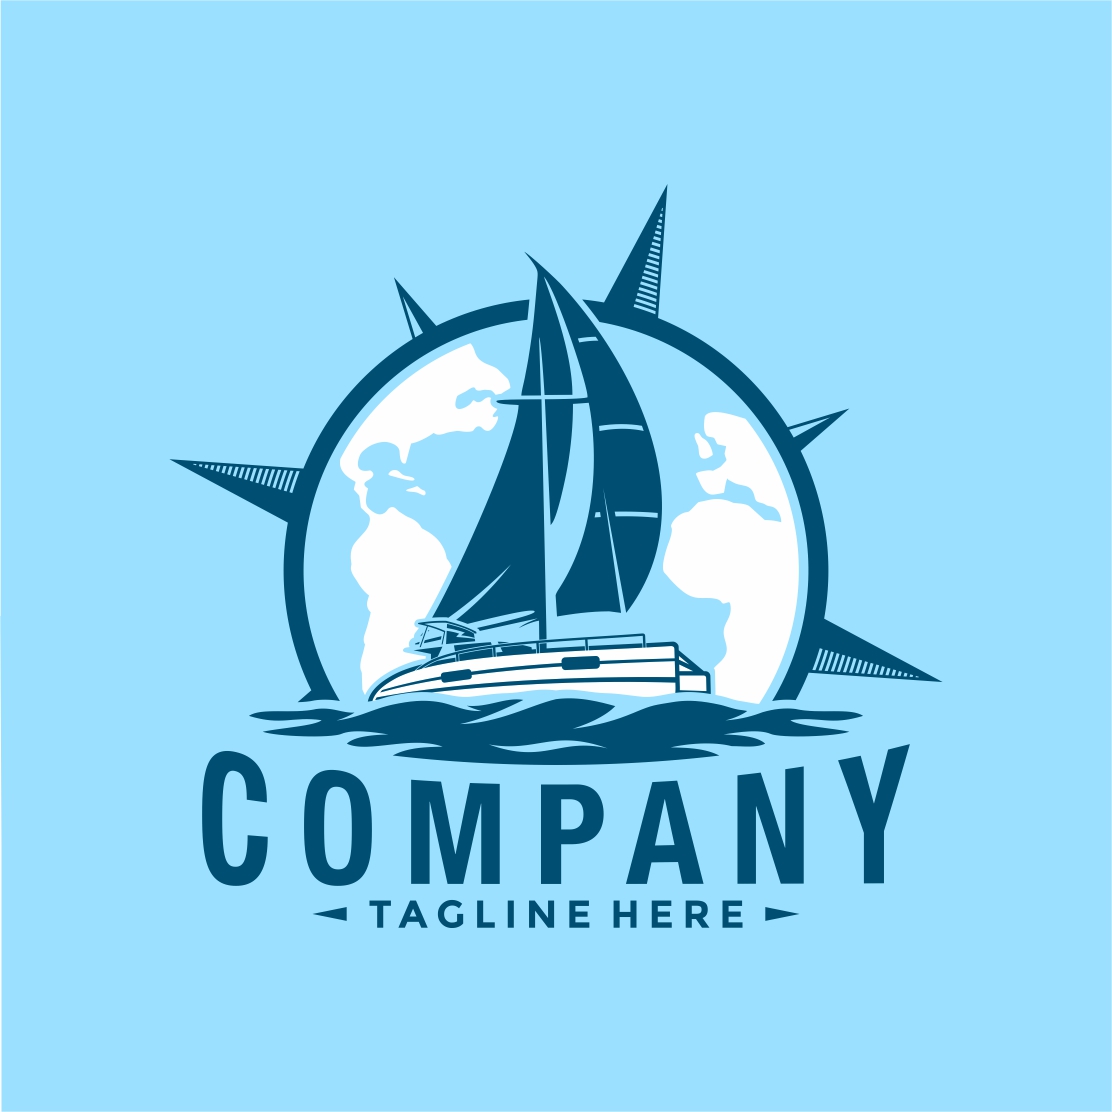 Catamaran, Yacht and Boat Symbol Logo Design with compass background - only 10$ preview image.